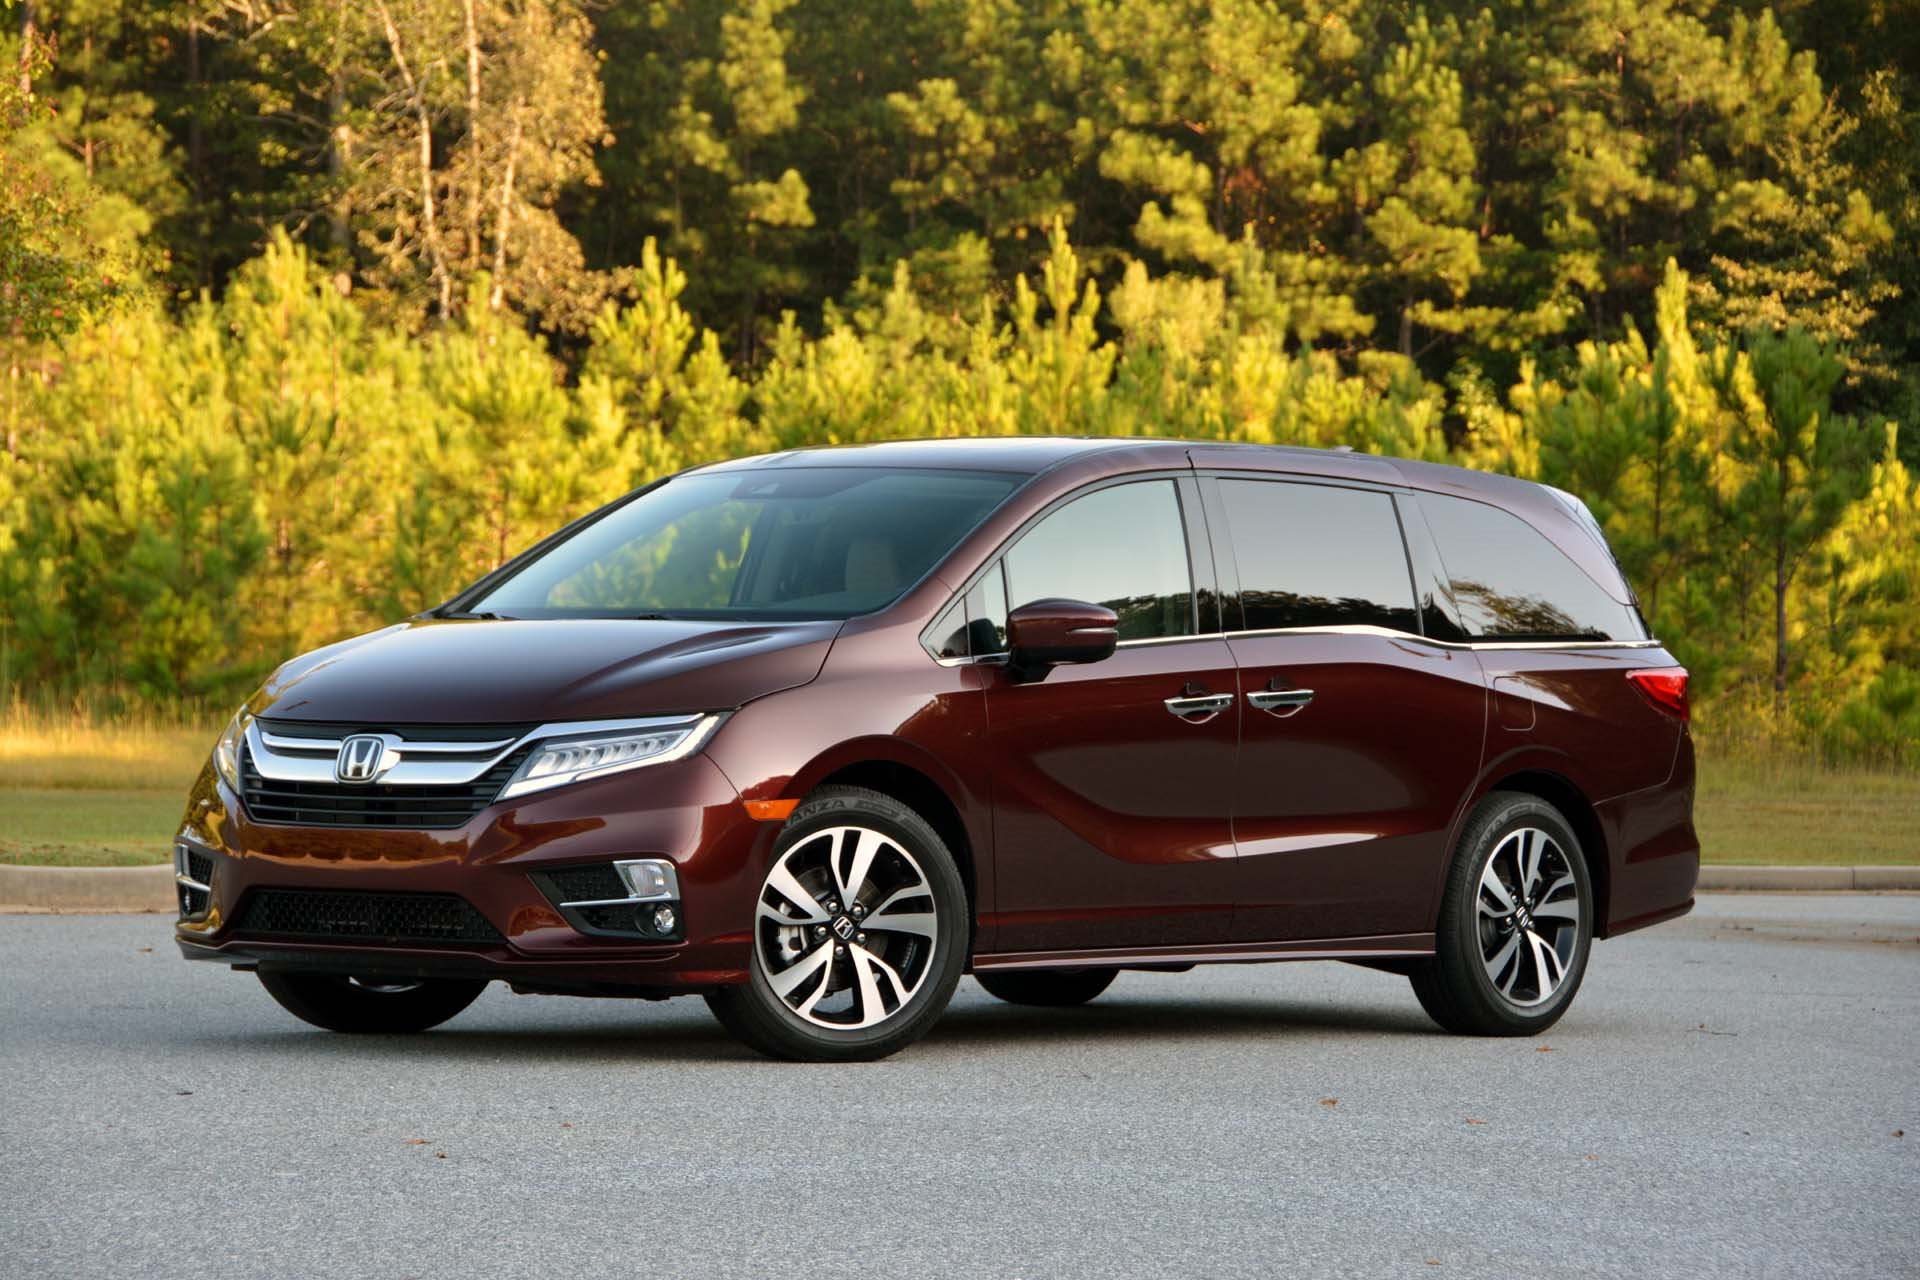 What Is A Good Price For Honda Odyssey Ex-L